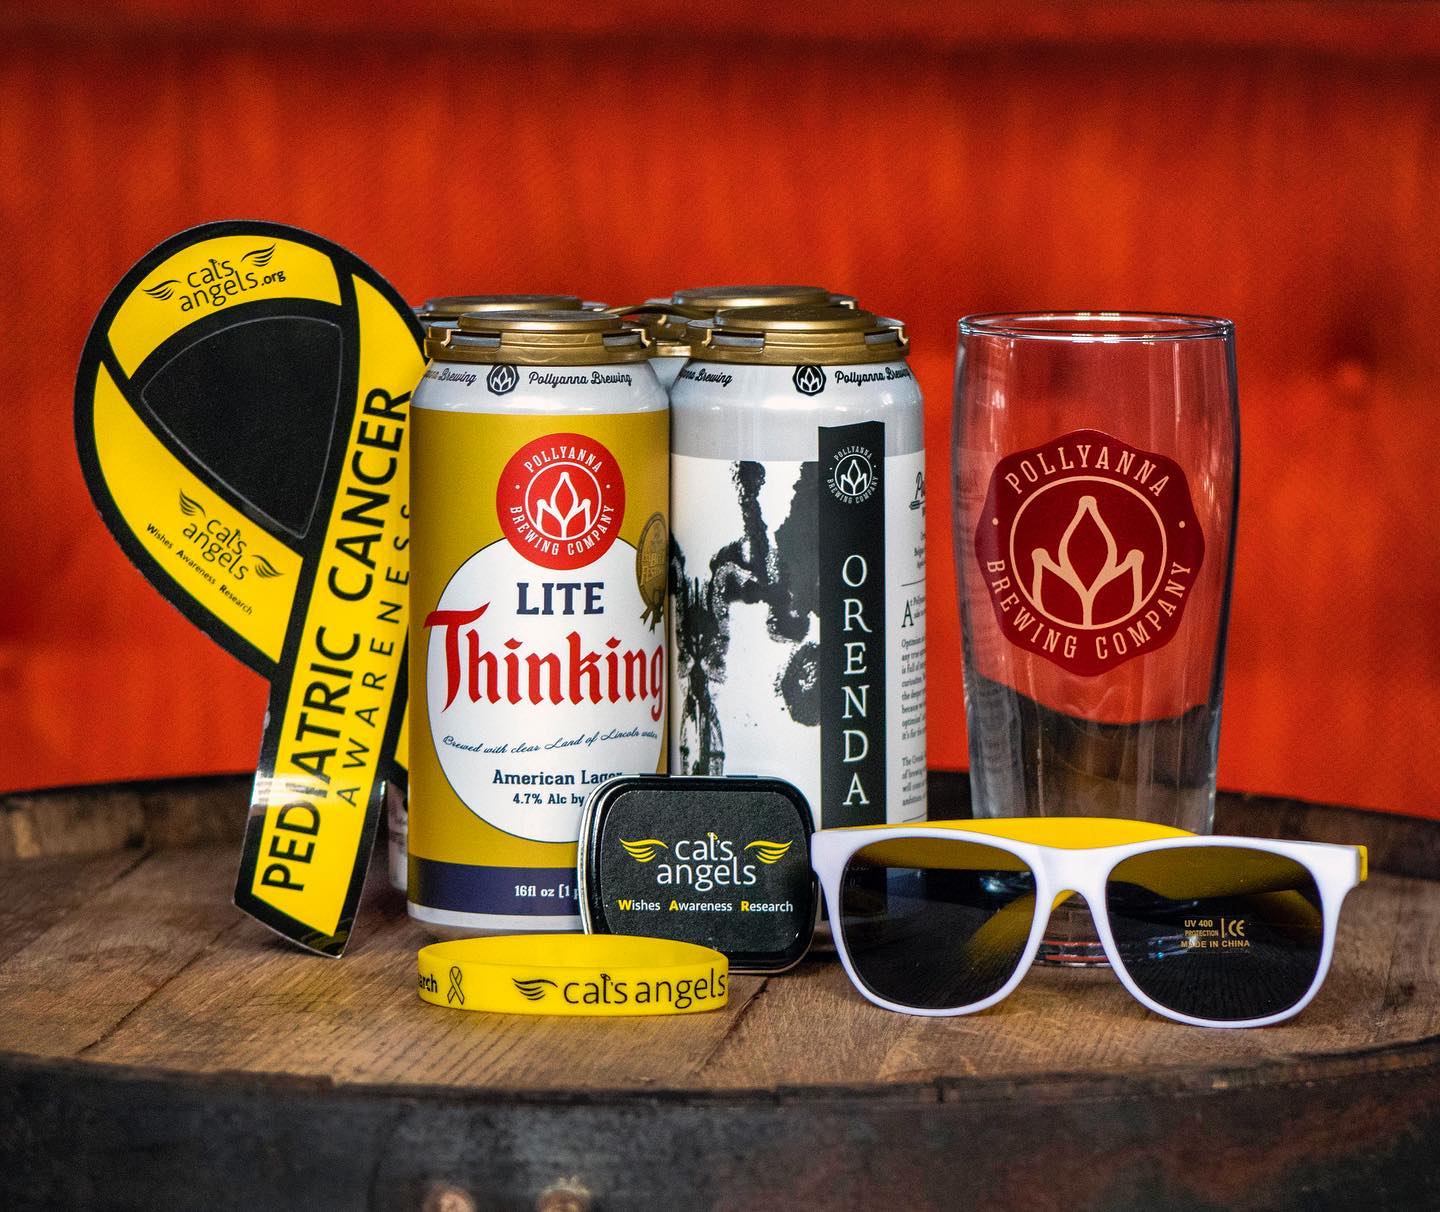 Pollyanna Beer Cans, Pollyanna Beer Glass, Pediatric Cancer Ribbon, Sunglasses, and bracelet